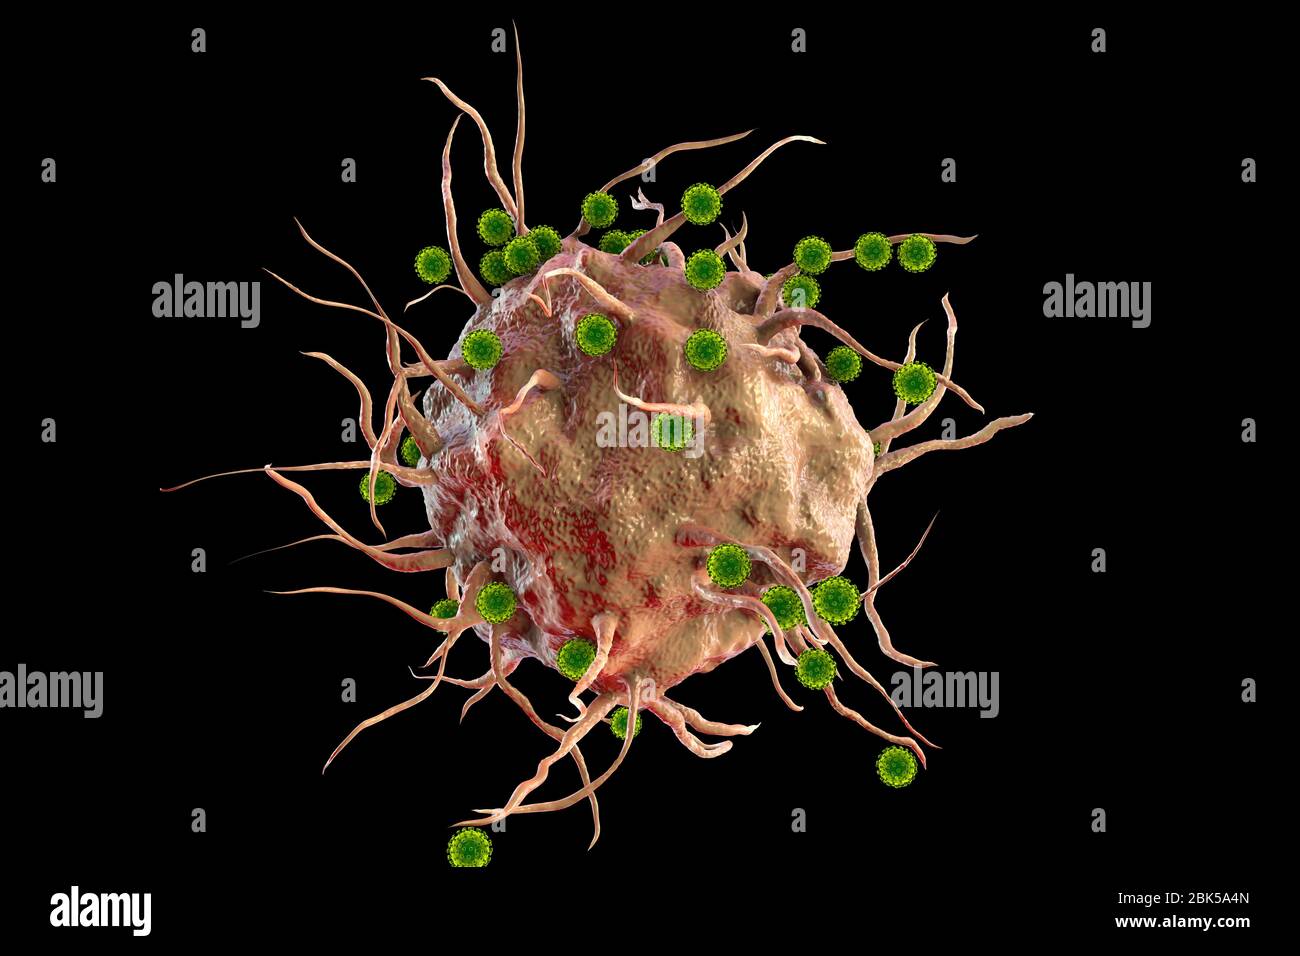 SARS-CoV-2 viruses and immune cell. Conceptual image illustrating antiviral immunity and vaccination. Stock Photo